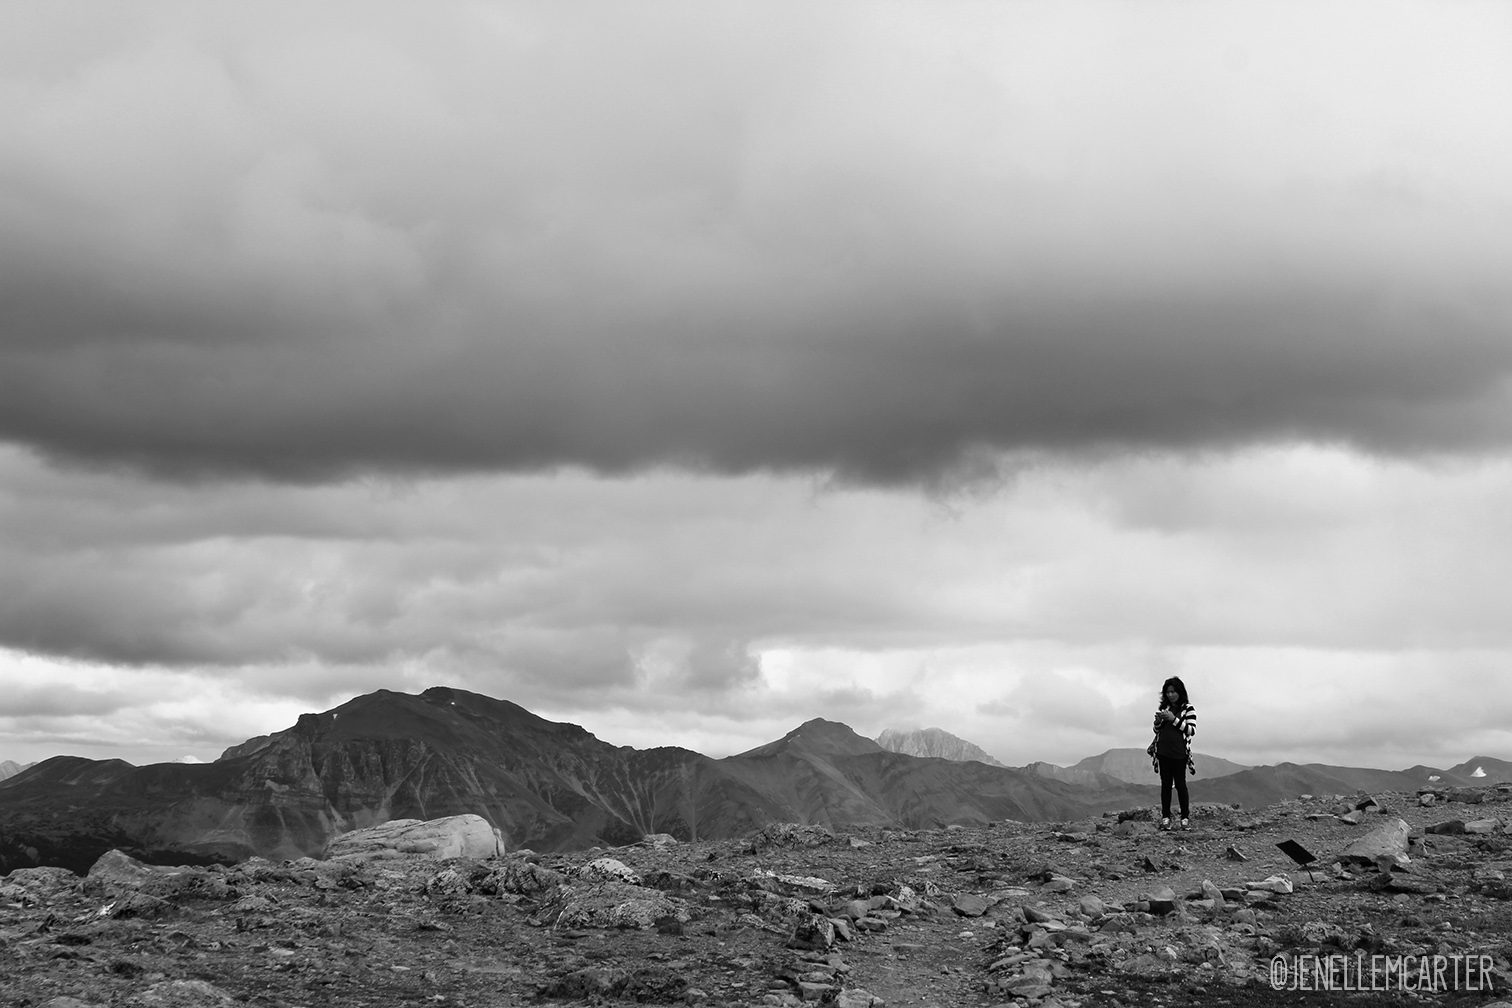 A woman stands alone on top of a mountain.